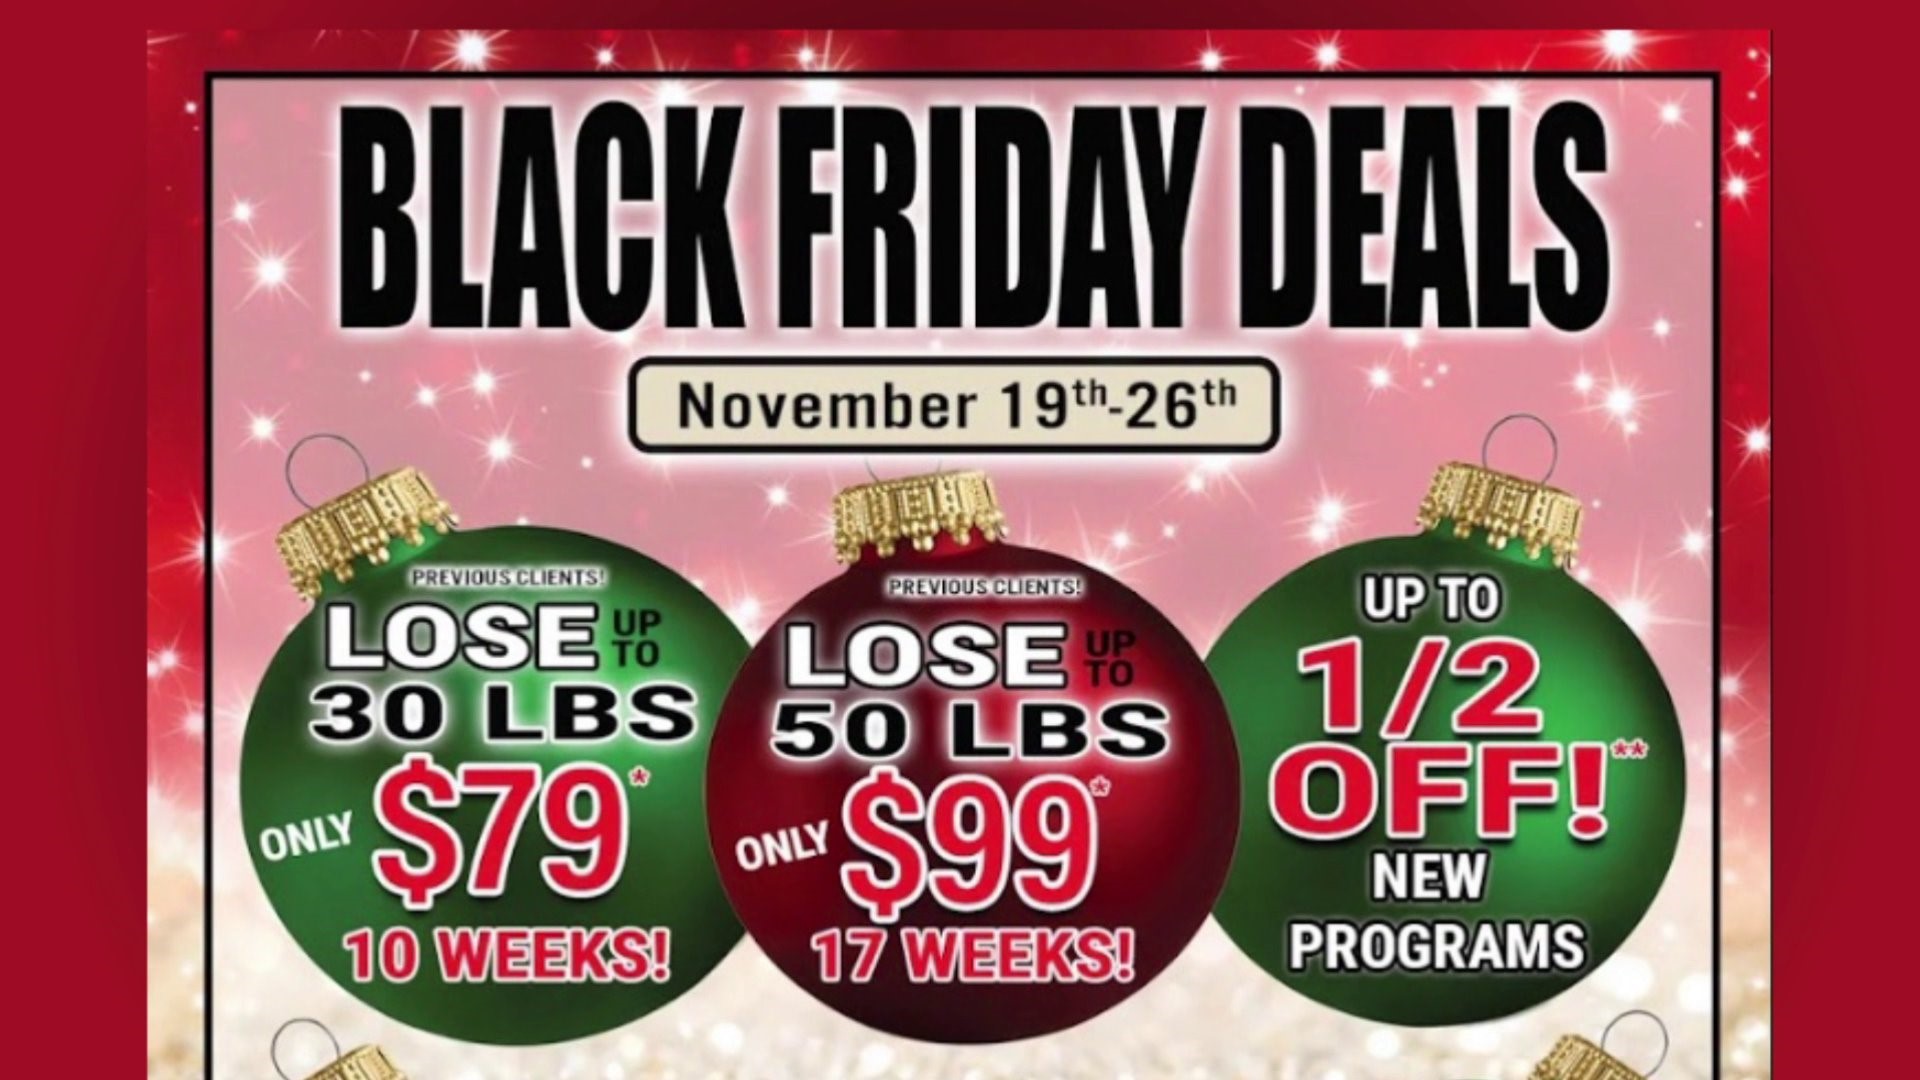 Metabolic Research Center - Black Friday Week Deals